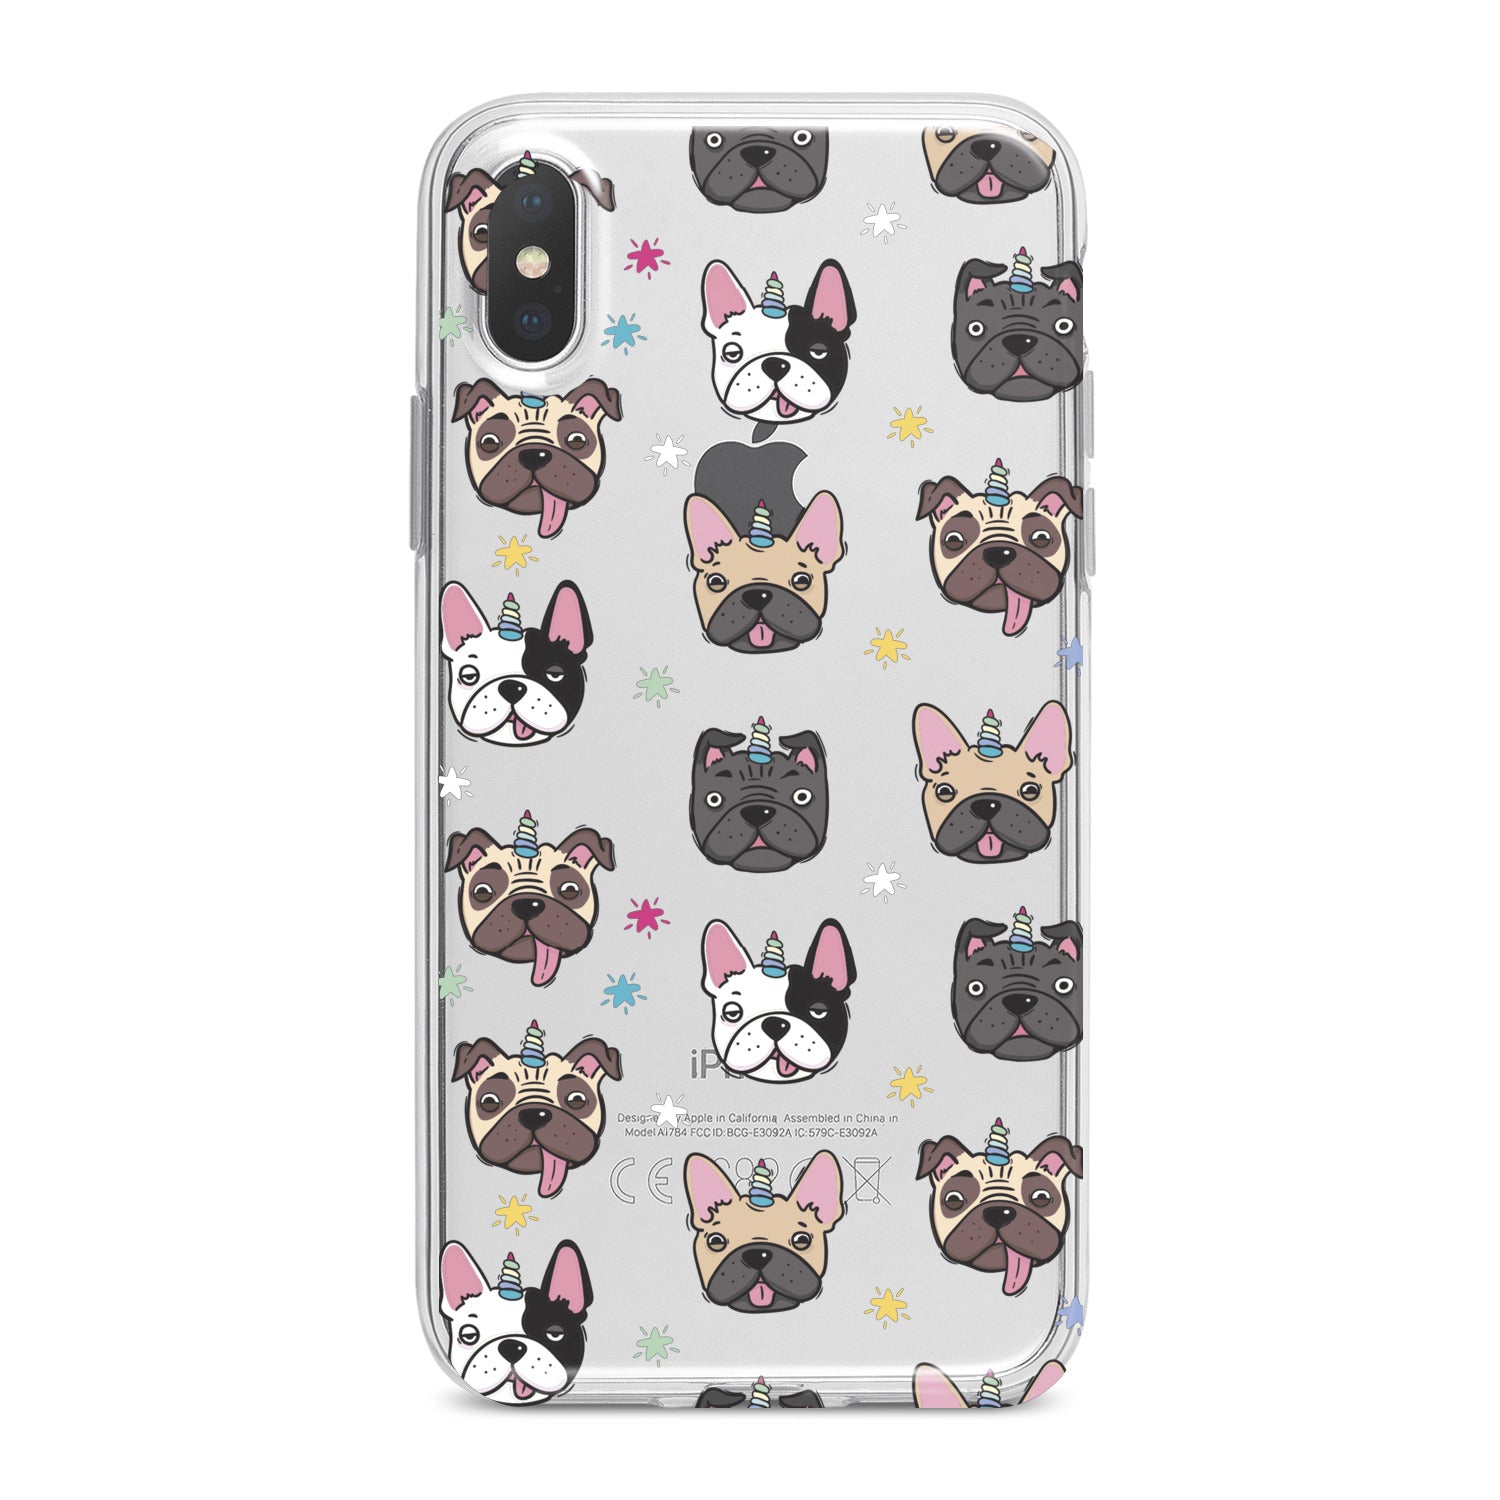 Lex Altern Cute Dog Pttern Phone Case for your iPhone & Android phone.